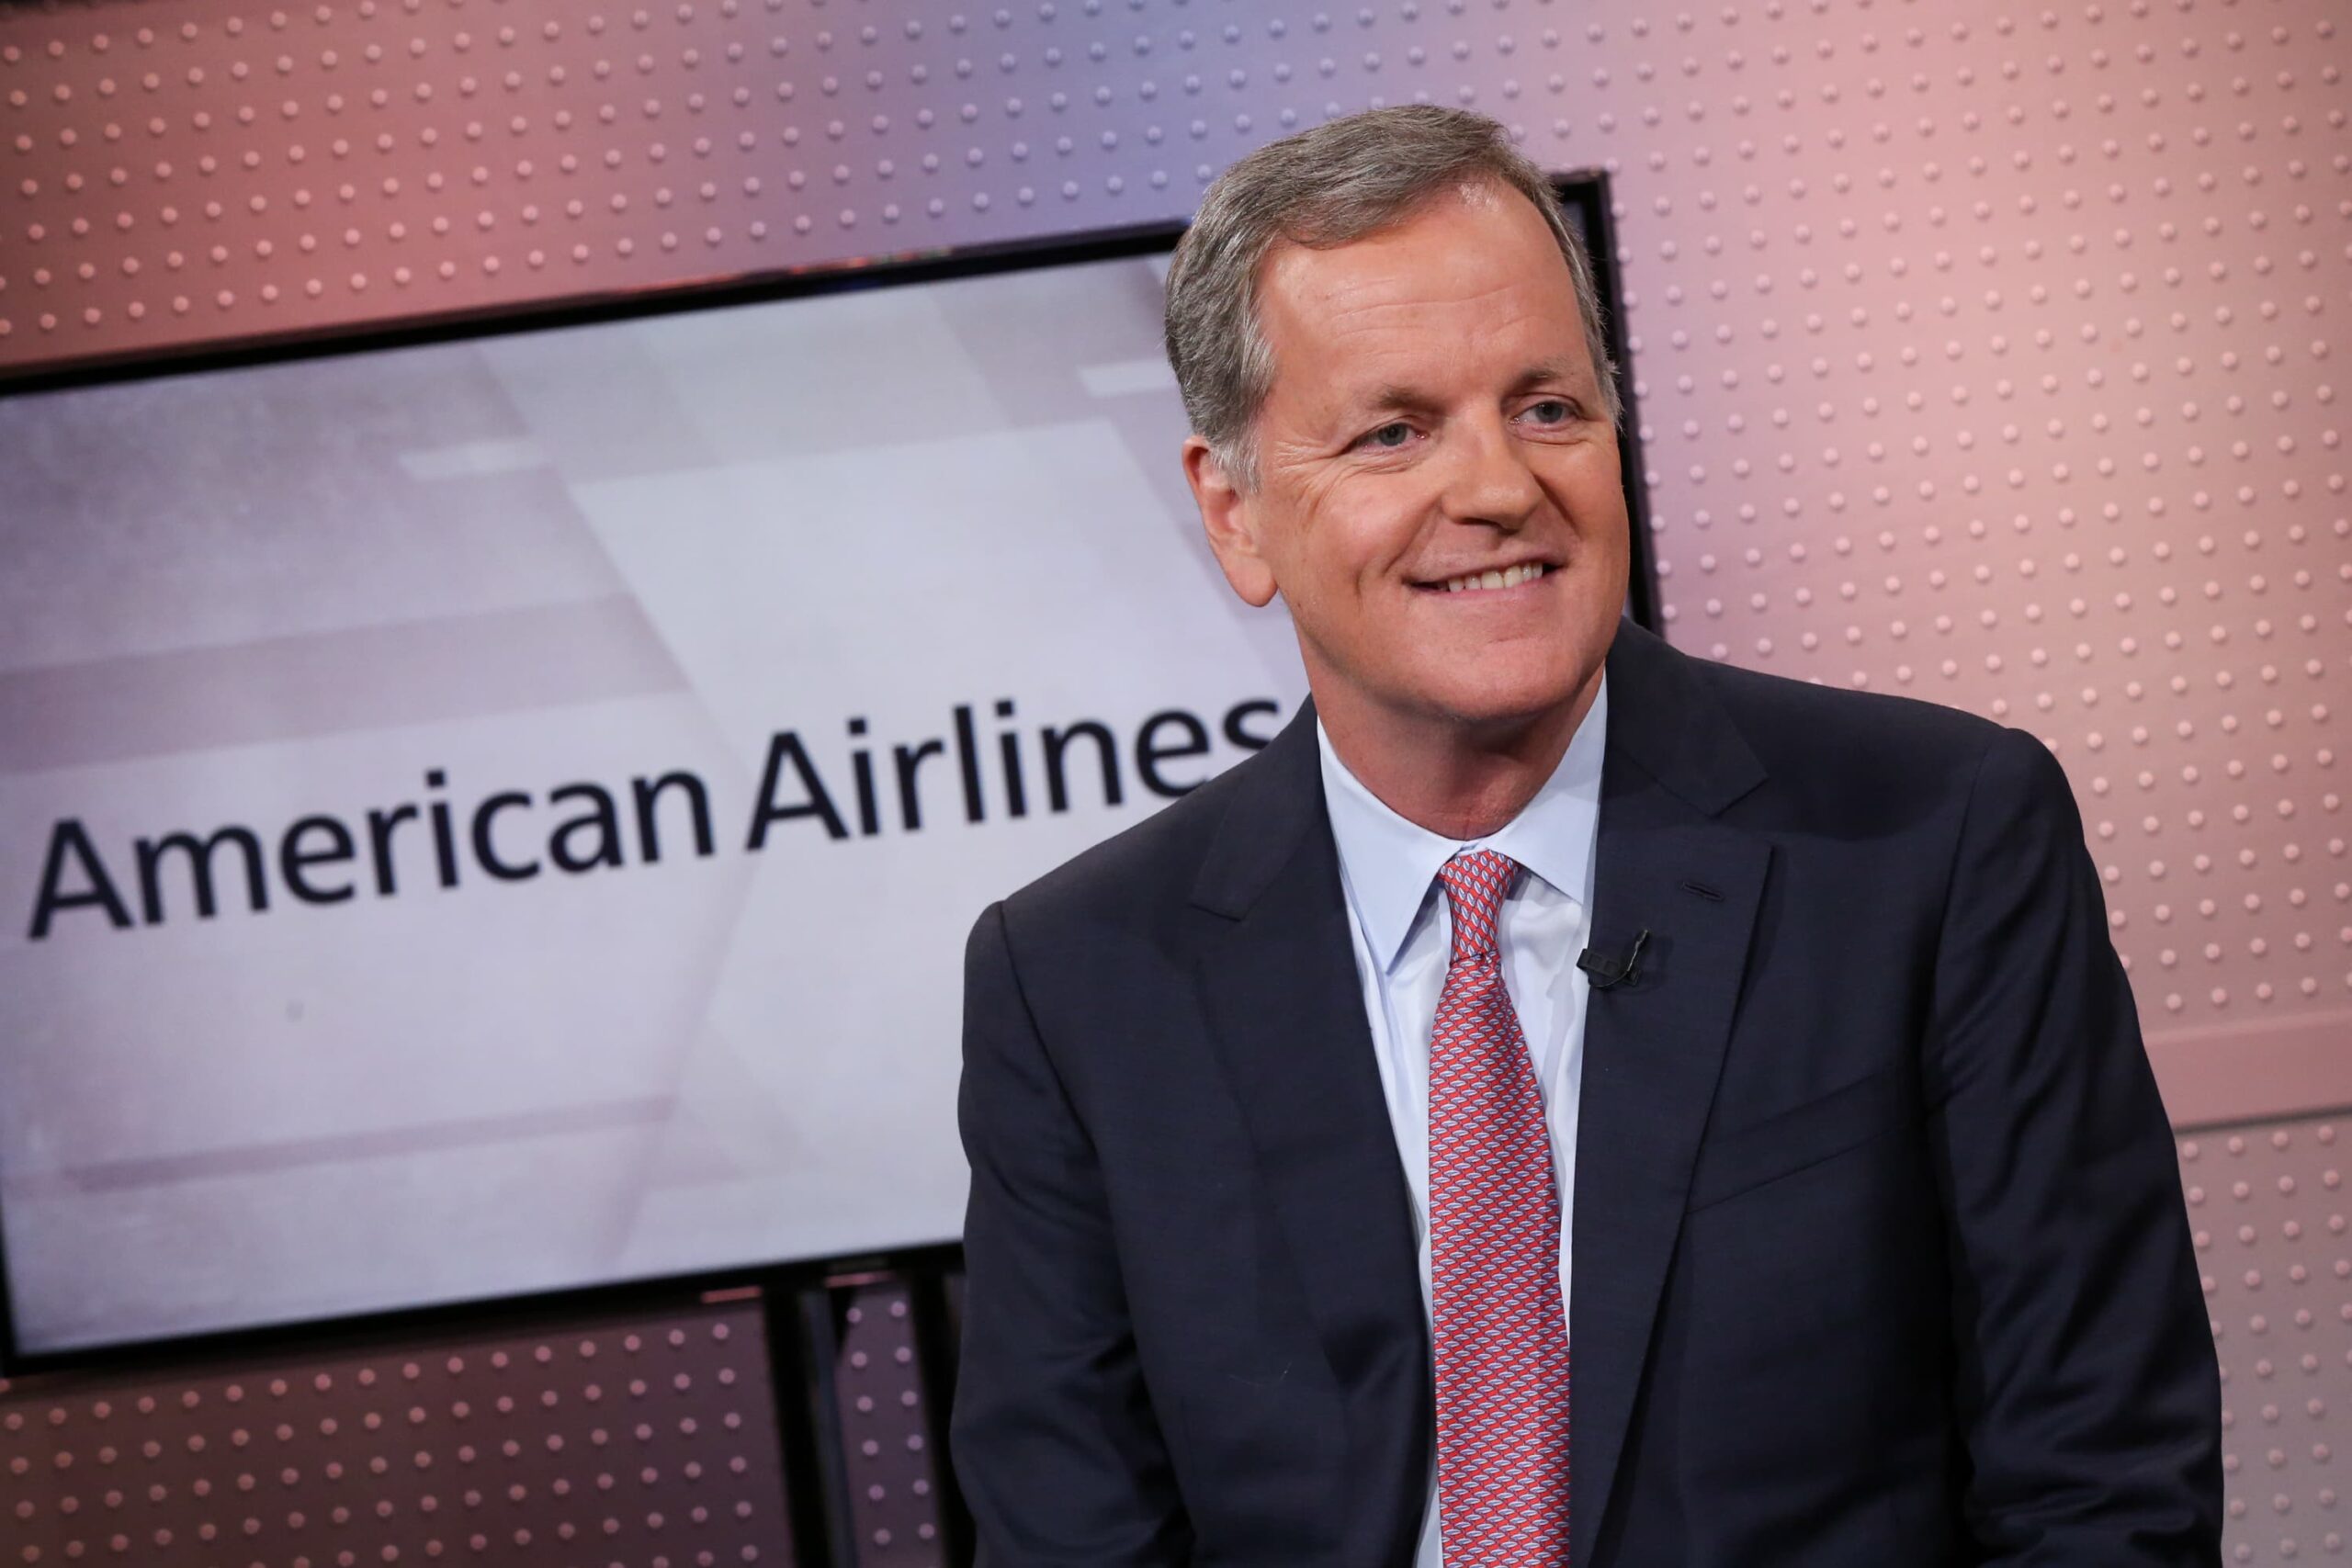 American Airlines CEO Doug Parker to retire, President Isom to take reins March 31